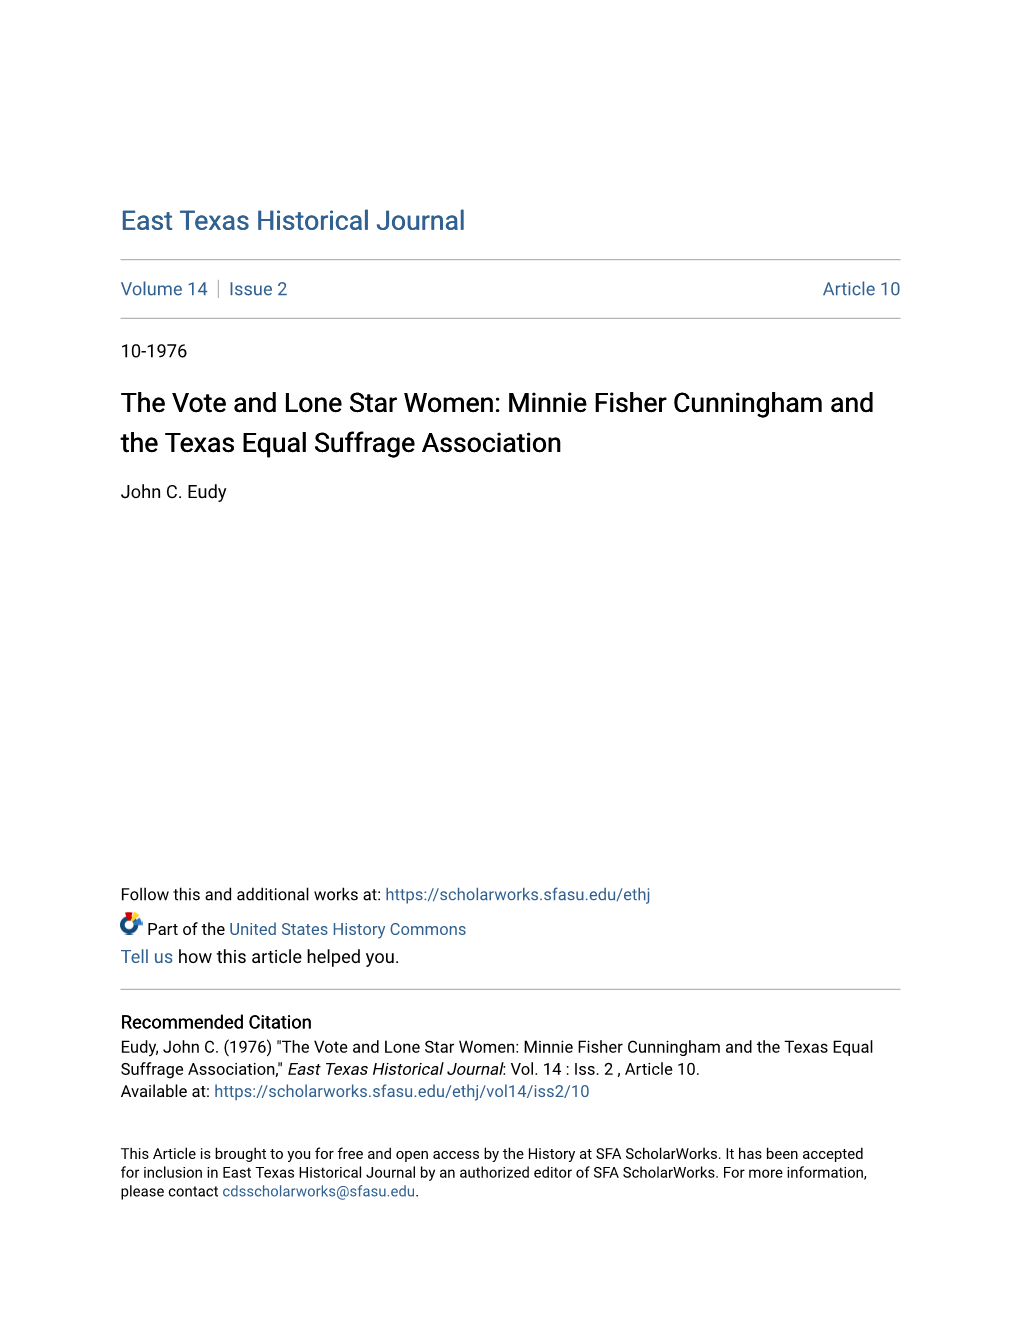 The Vote and Lone Star Women: Minnie Fisher Cunningham and the Texas Equal Suffrage Association